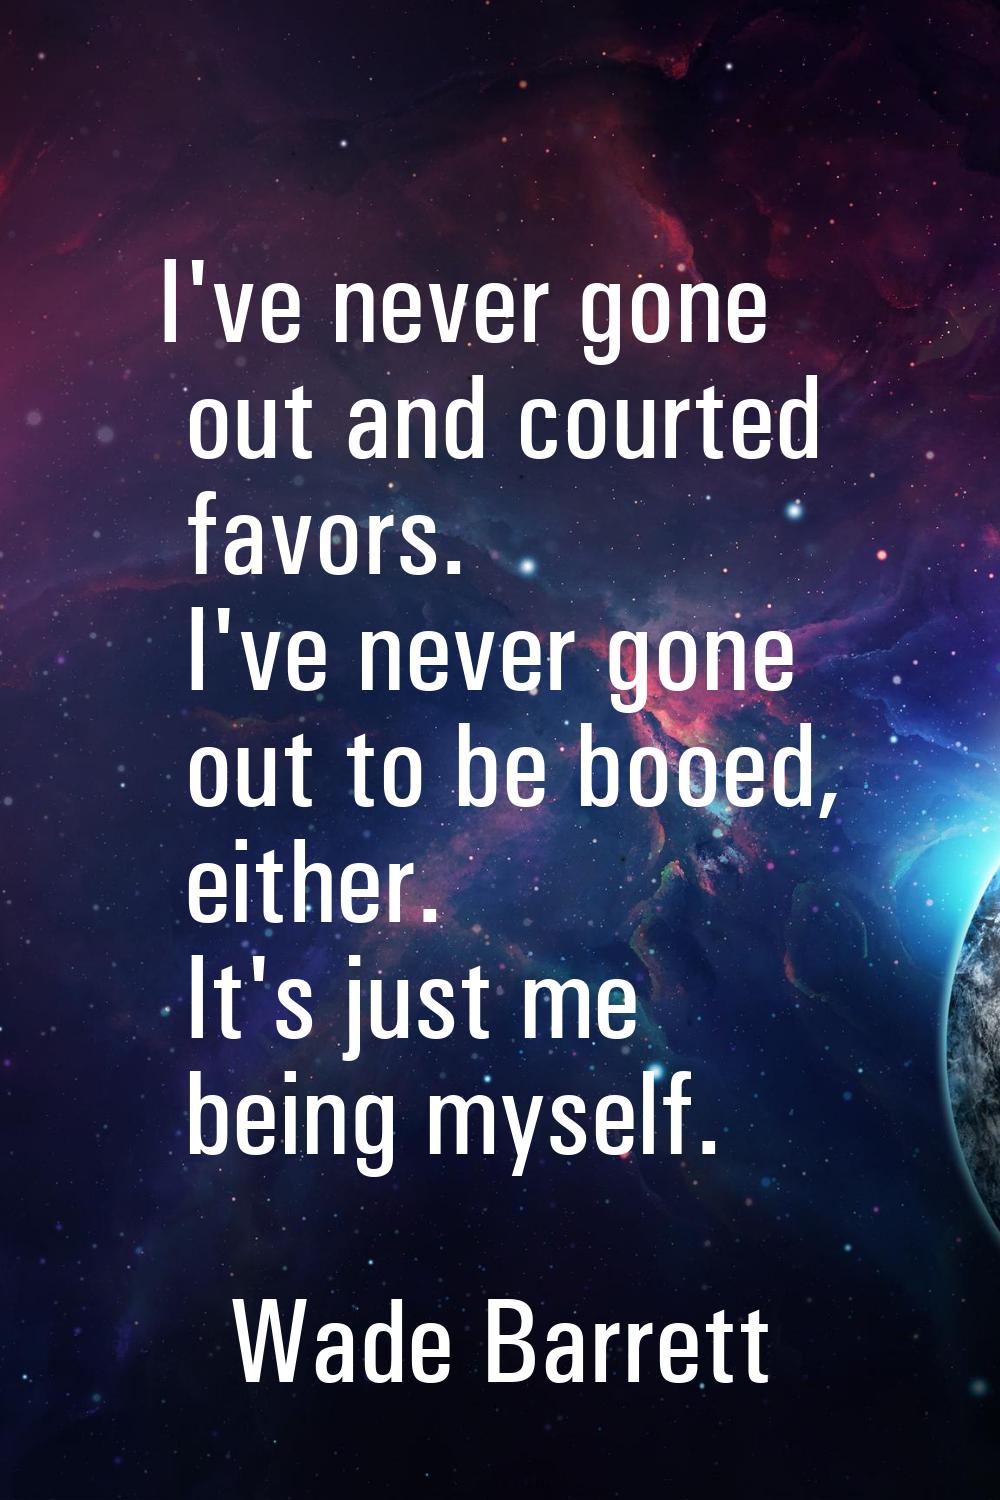 I've never gone out and courted favors. I've never gone out to be booed, either. It's just me being